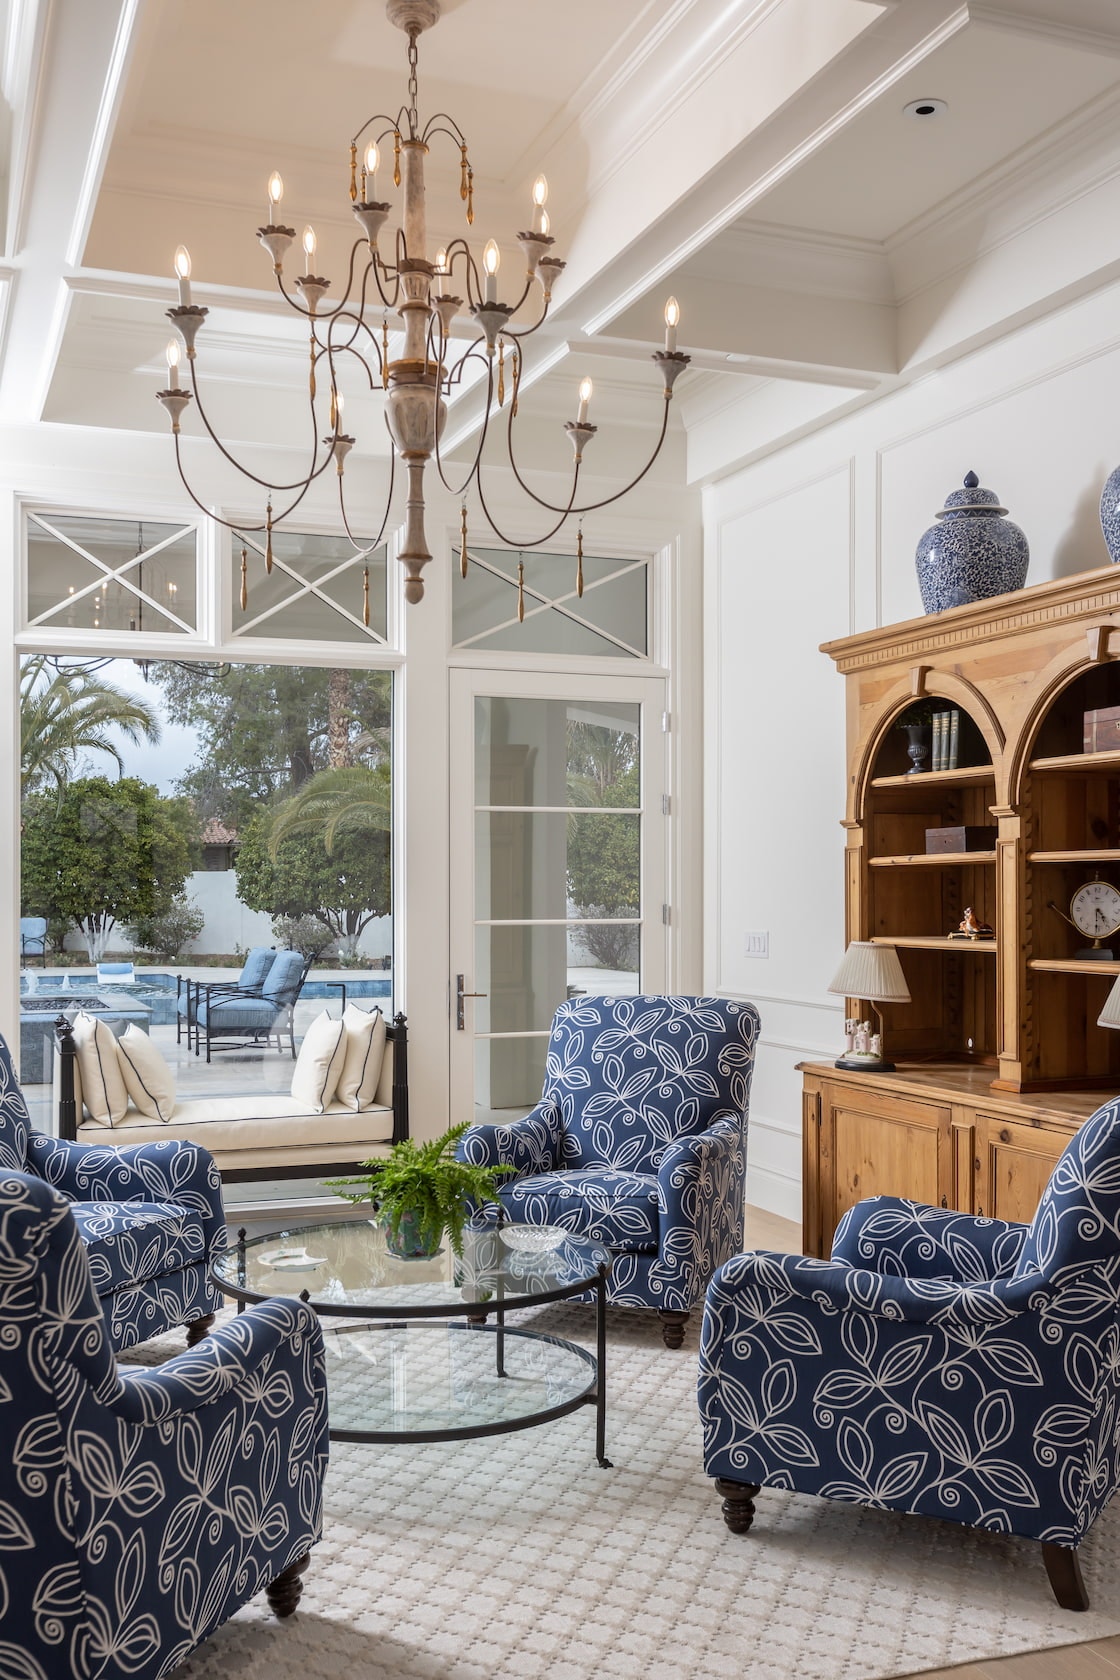 An Arizona living room with blue chairs and a chandelier features a custom hinged door and white windows.